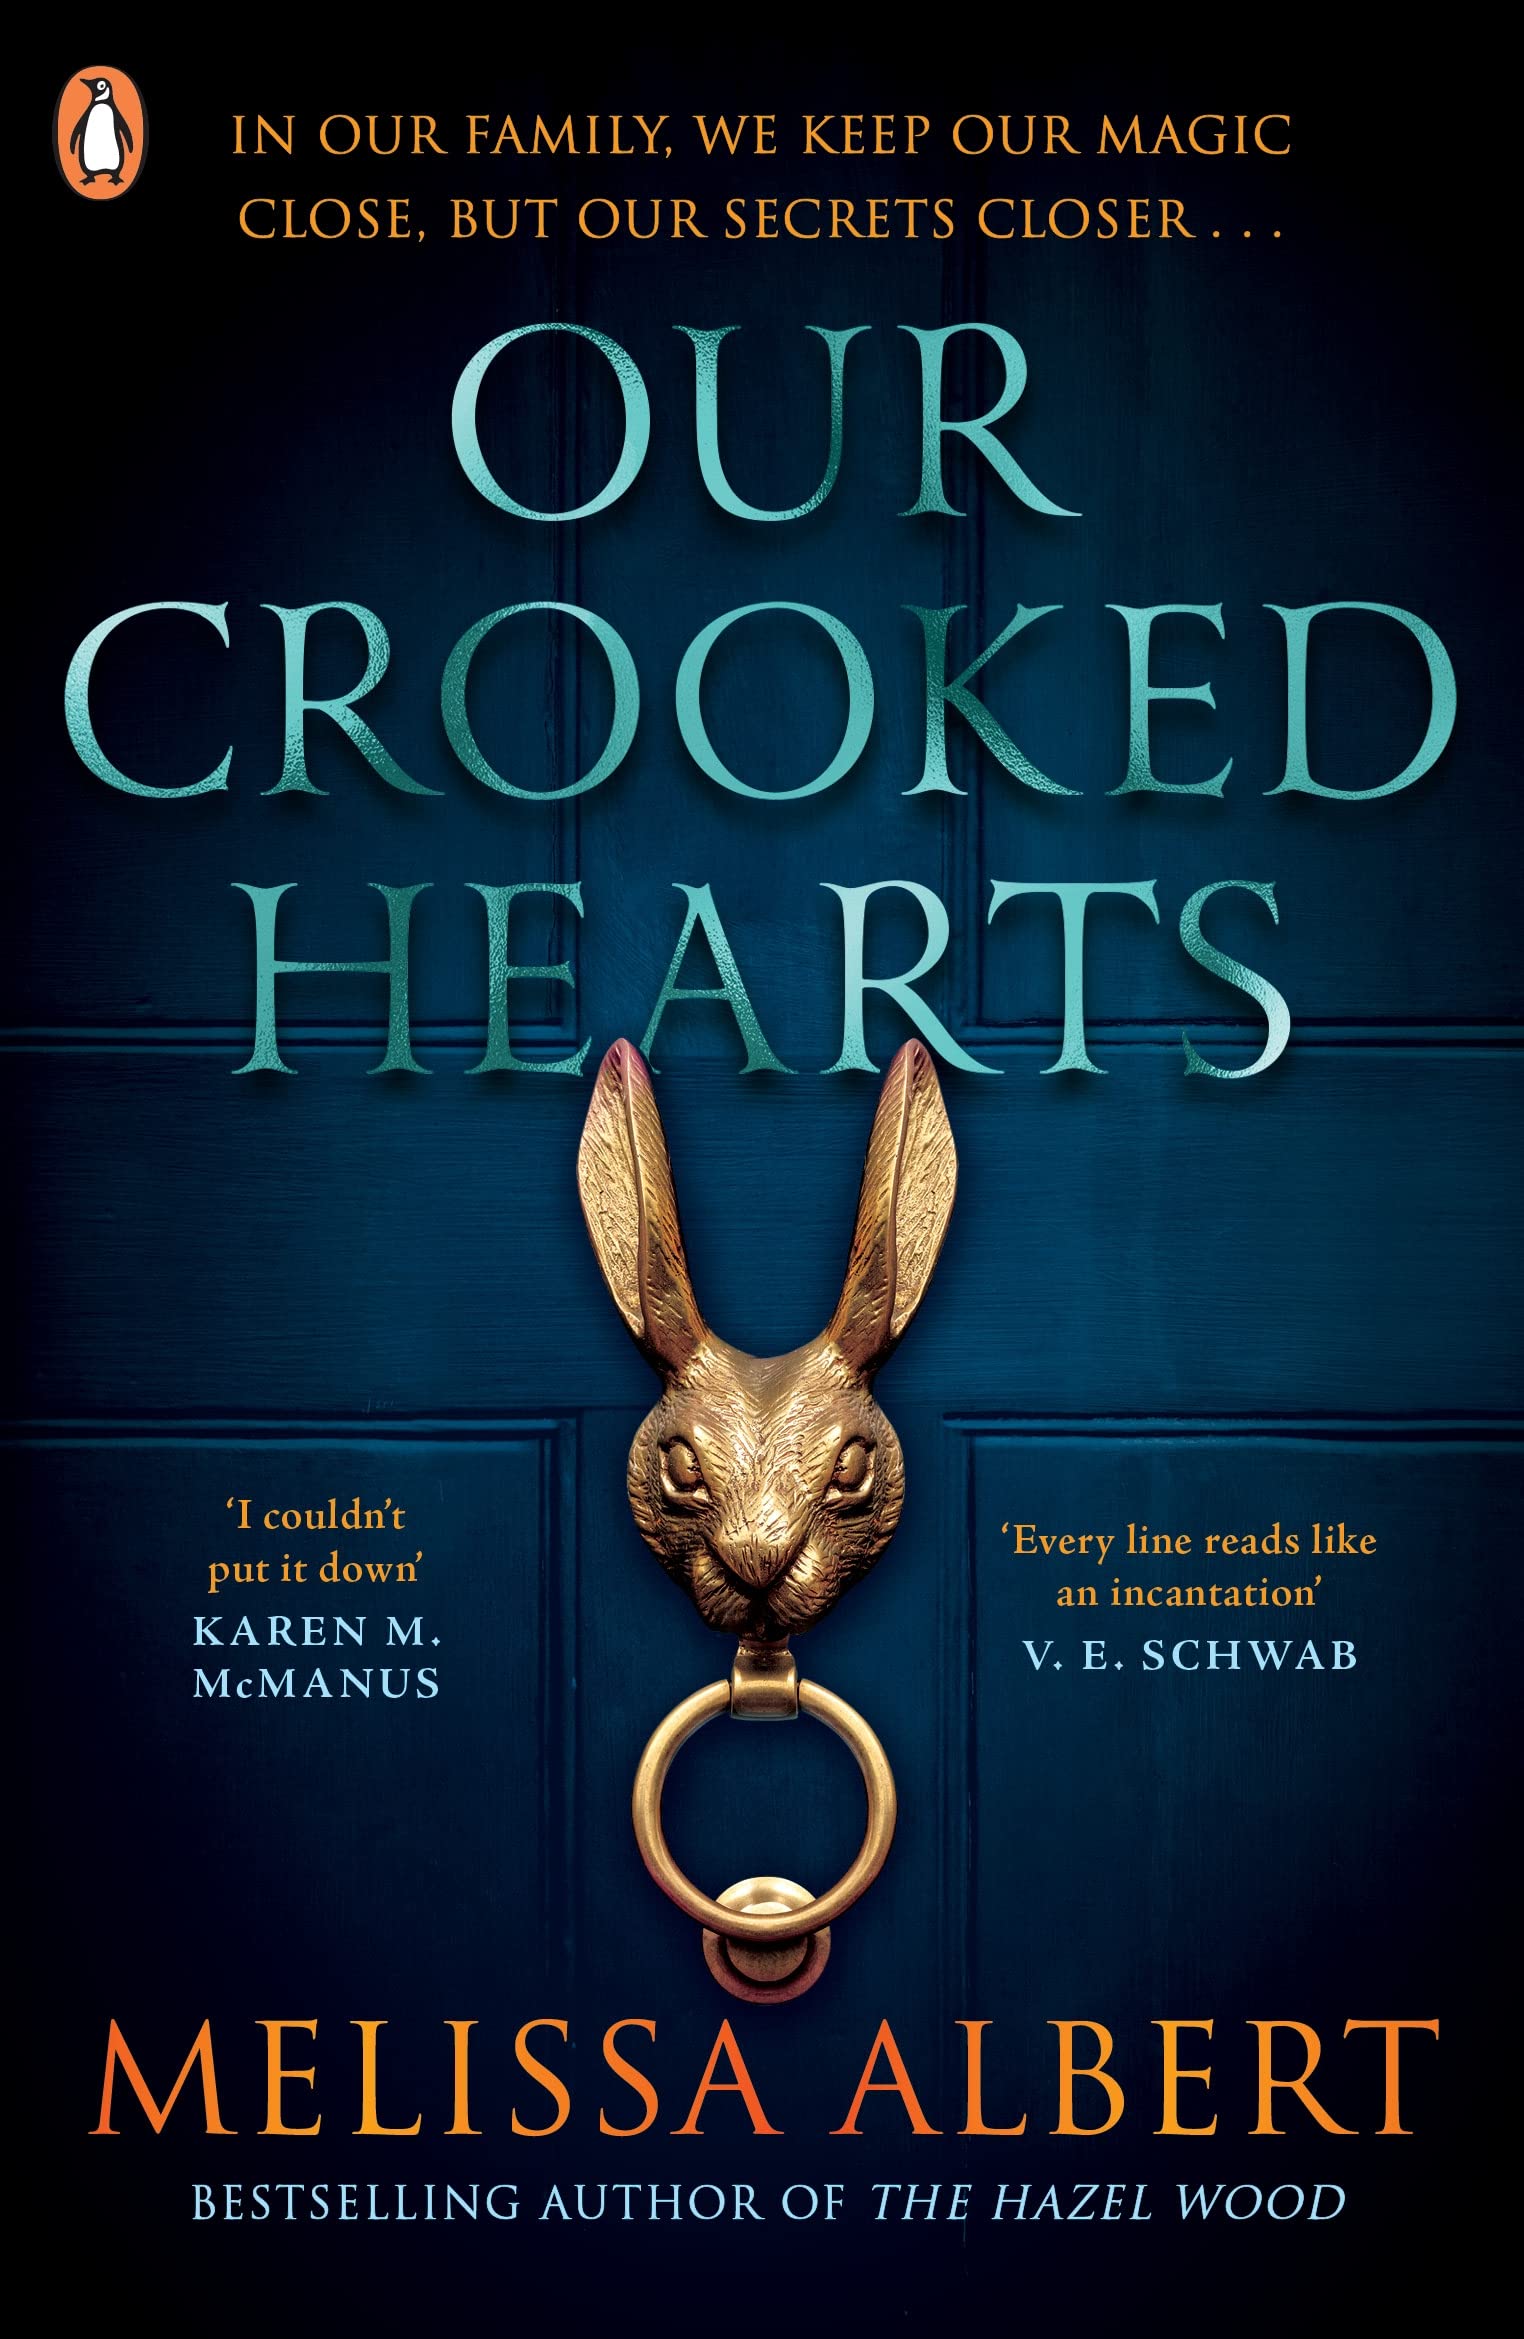 Our Crooked Hearts | Melissa Albert